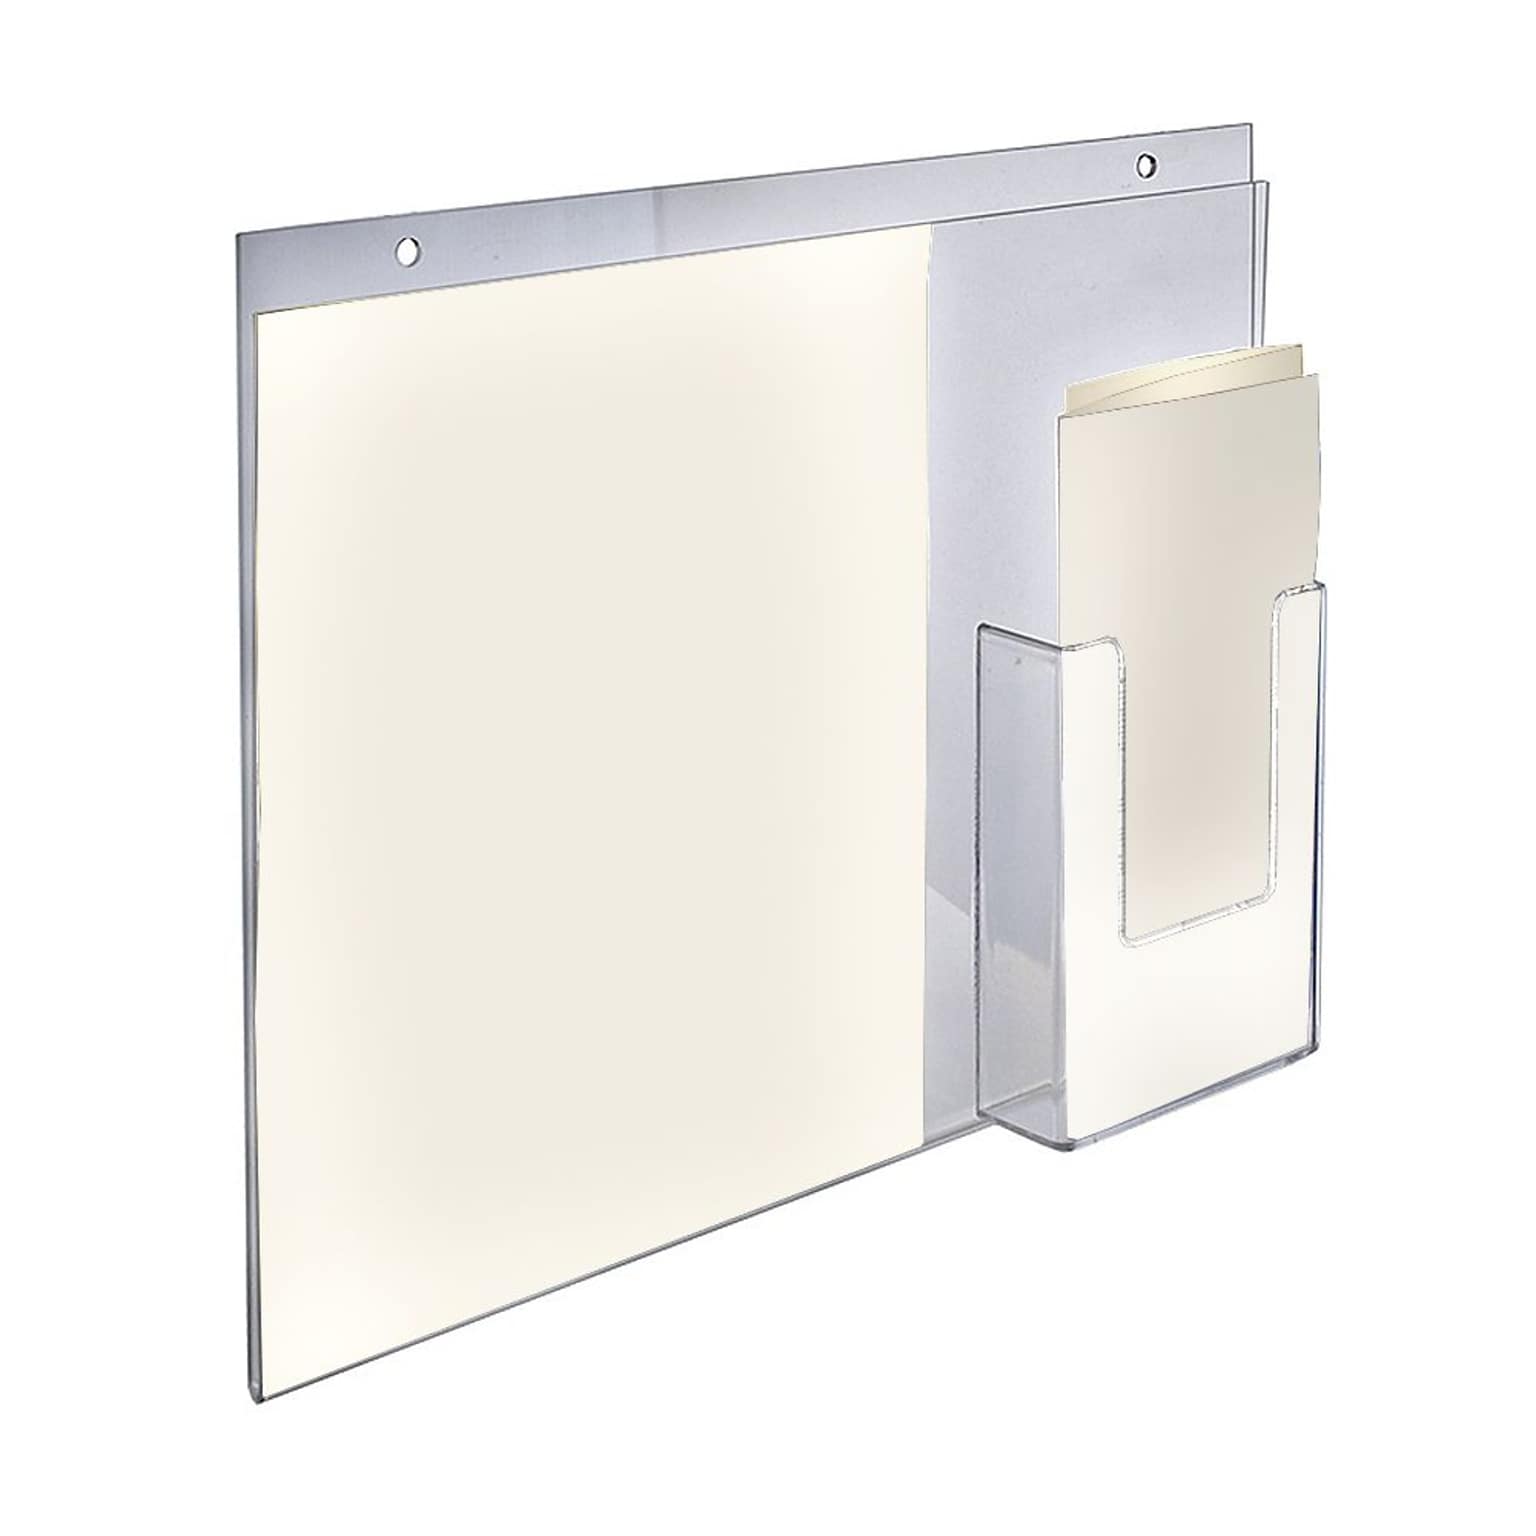 Azar Displays Acrylic Wall Mount Sign Holder with Brochure Holder, 14W x 11H